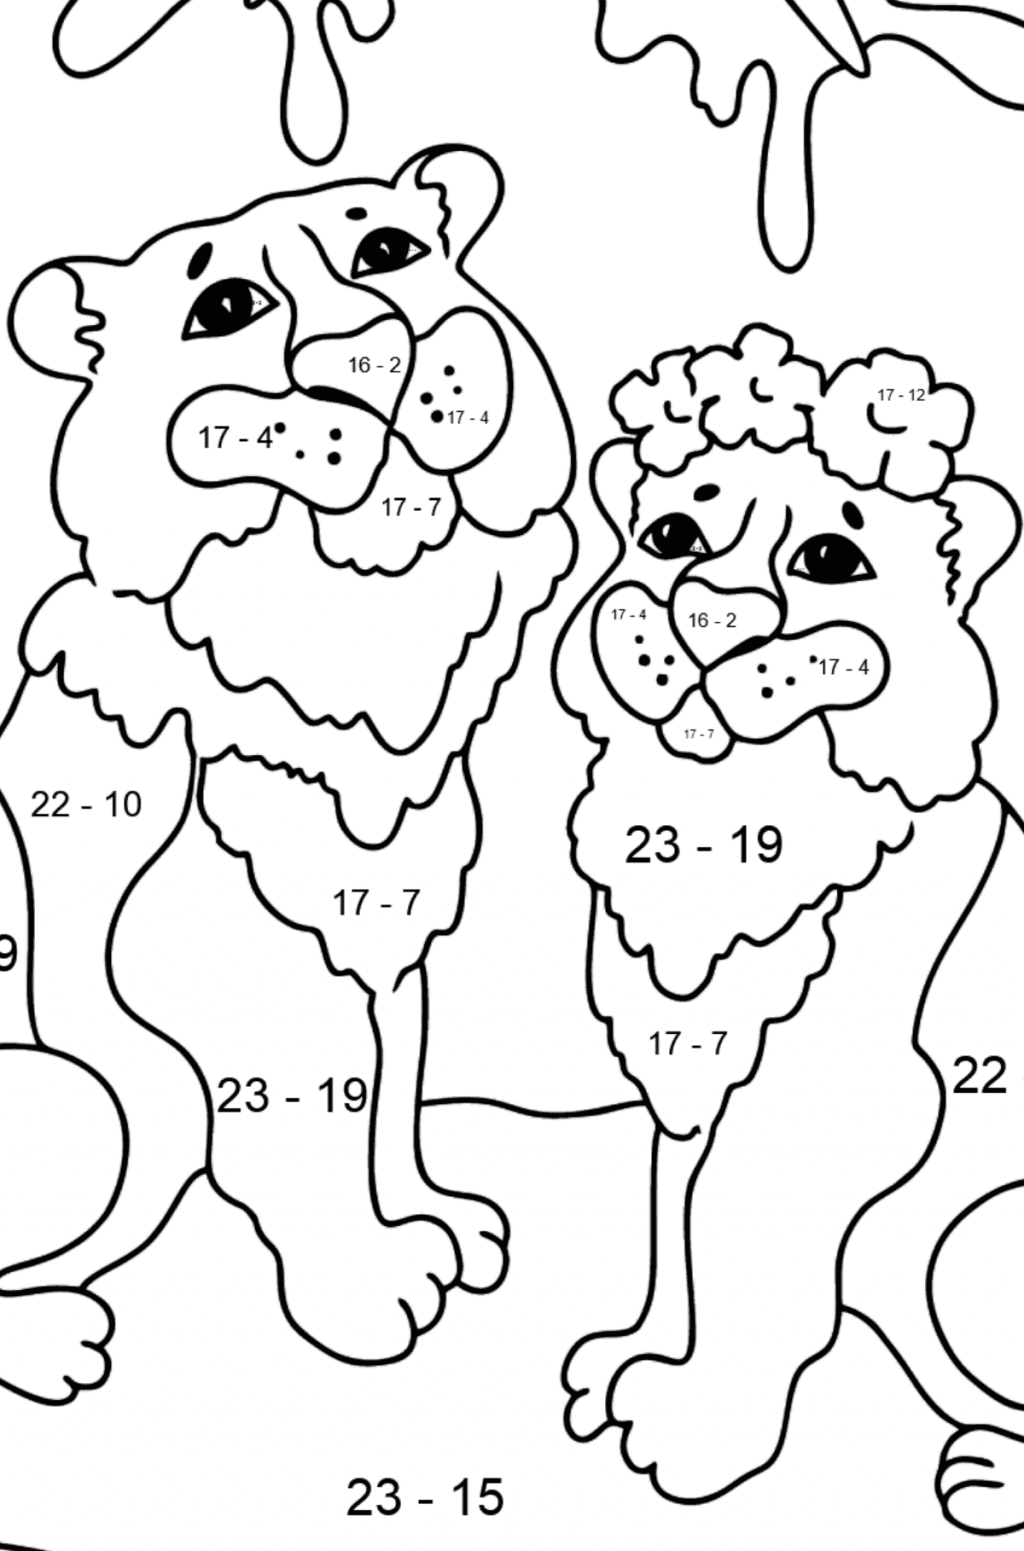 Online Coloring Page - Tigers with Butterflies